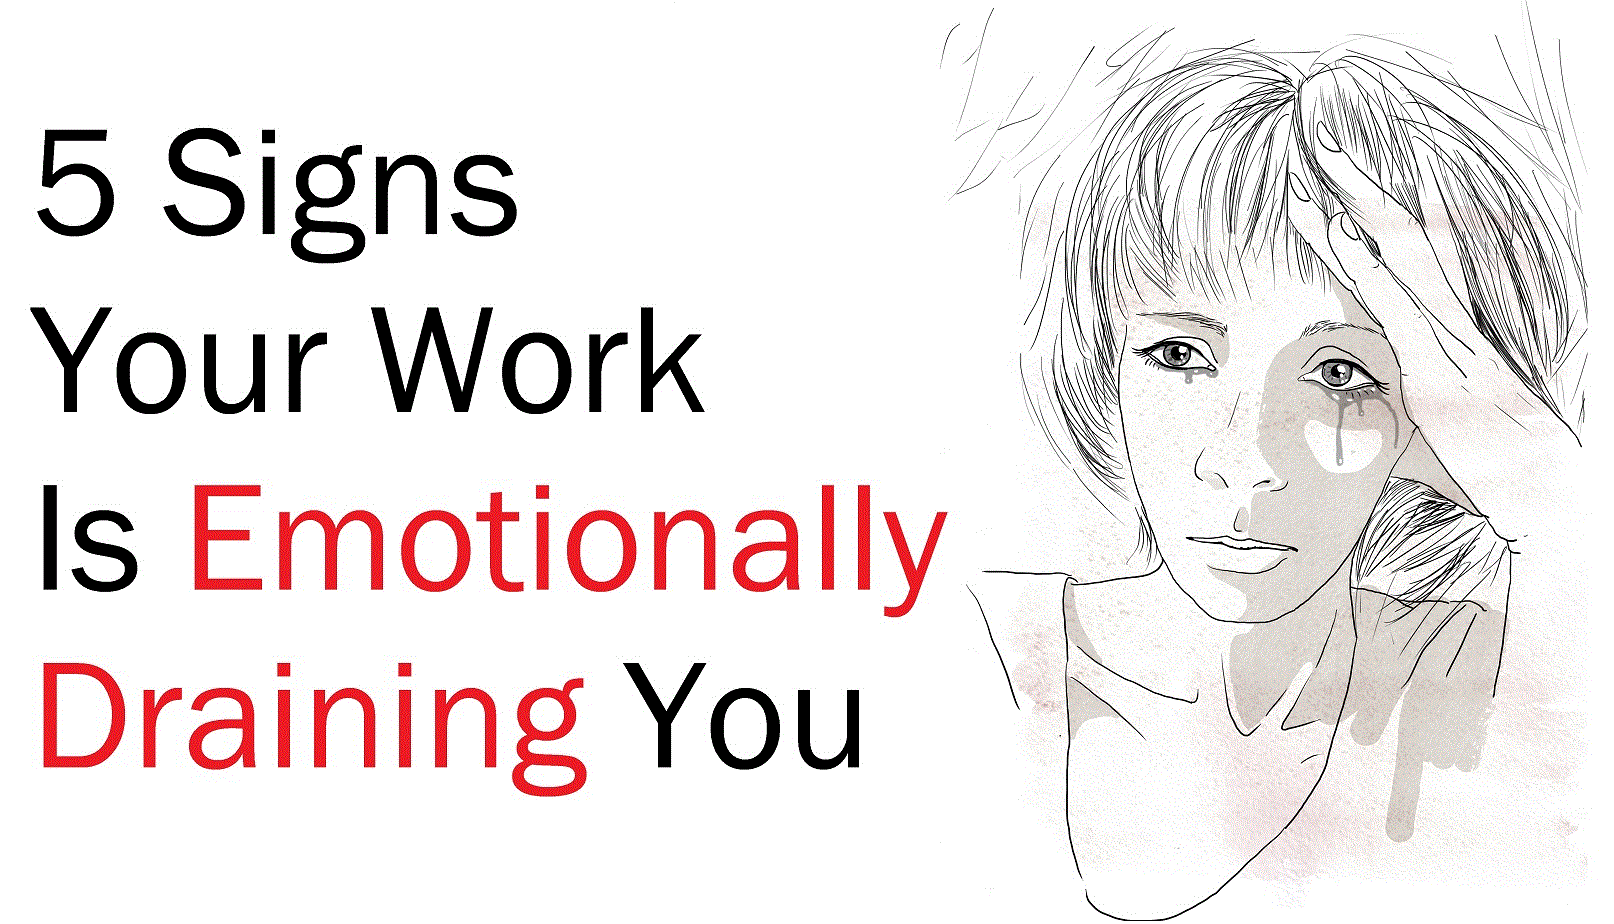 5 Signs Your Work Is Emotionally Draining You